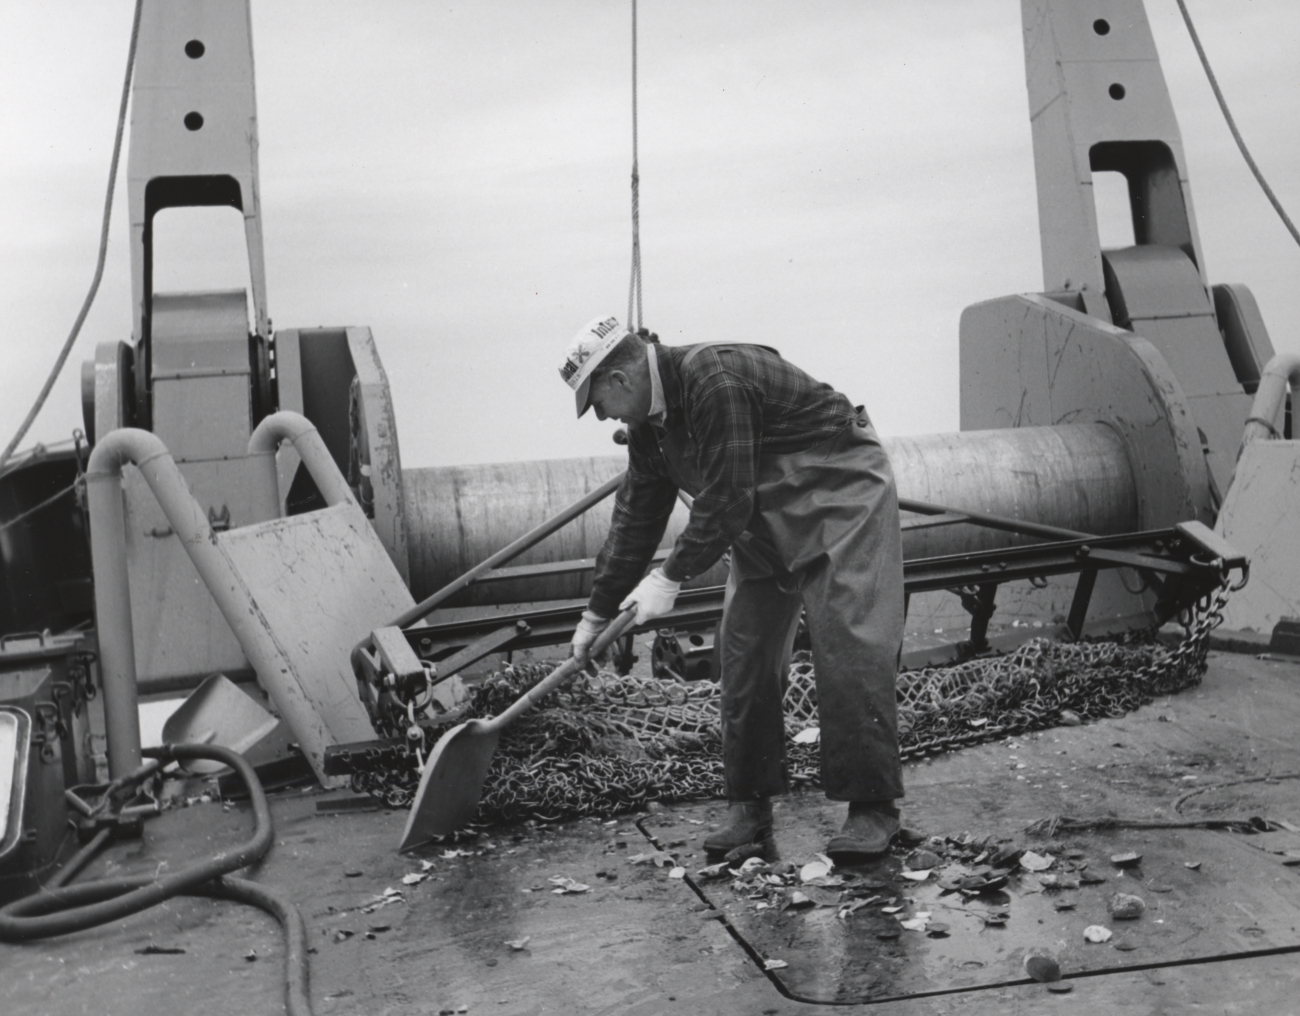 Clean up after culling through a haul from a sea scallop dredge on theBCF ship ALBATROSS IV